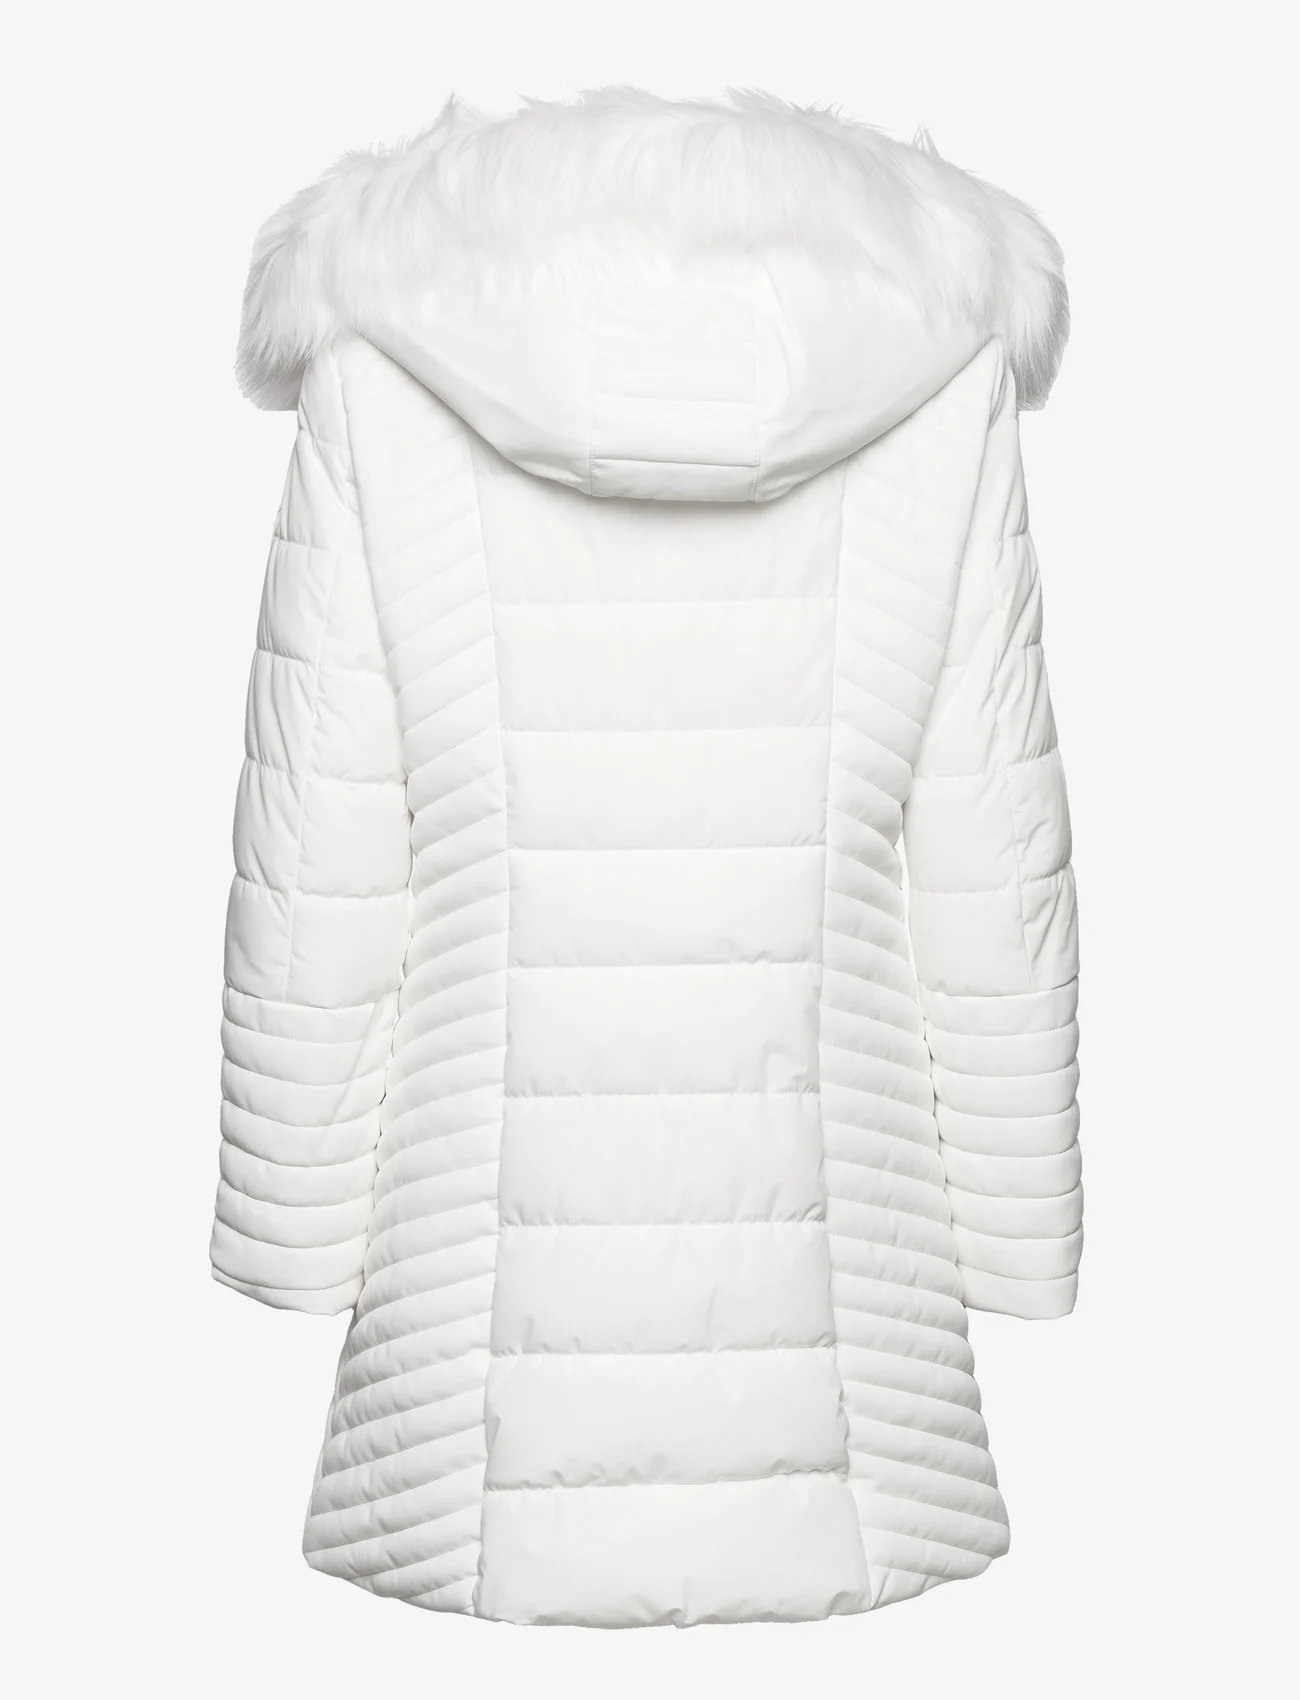 GUESS Jeans - NEW OXANA JACKET - winterjacken - pure white - 1